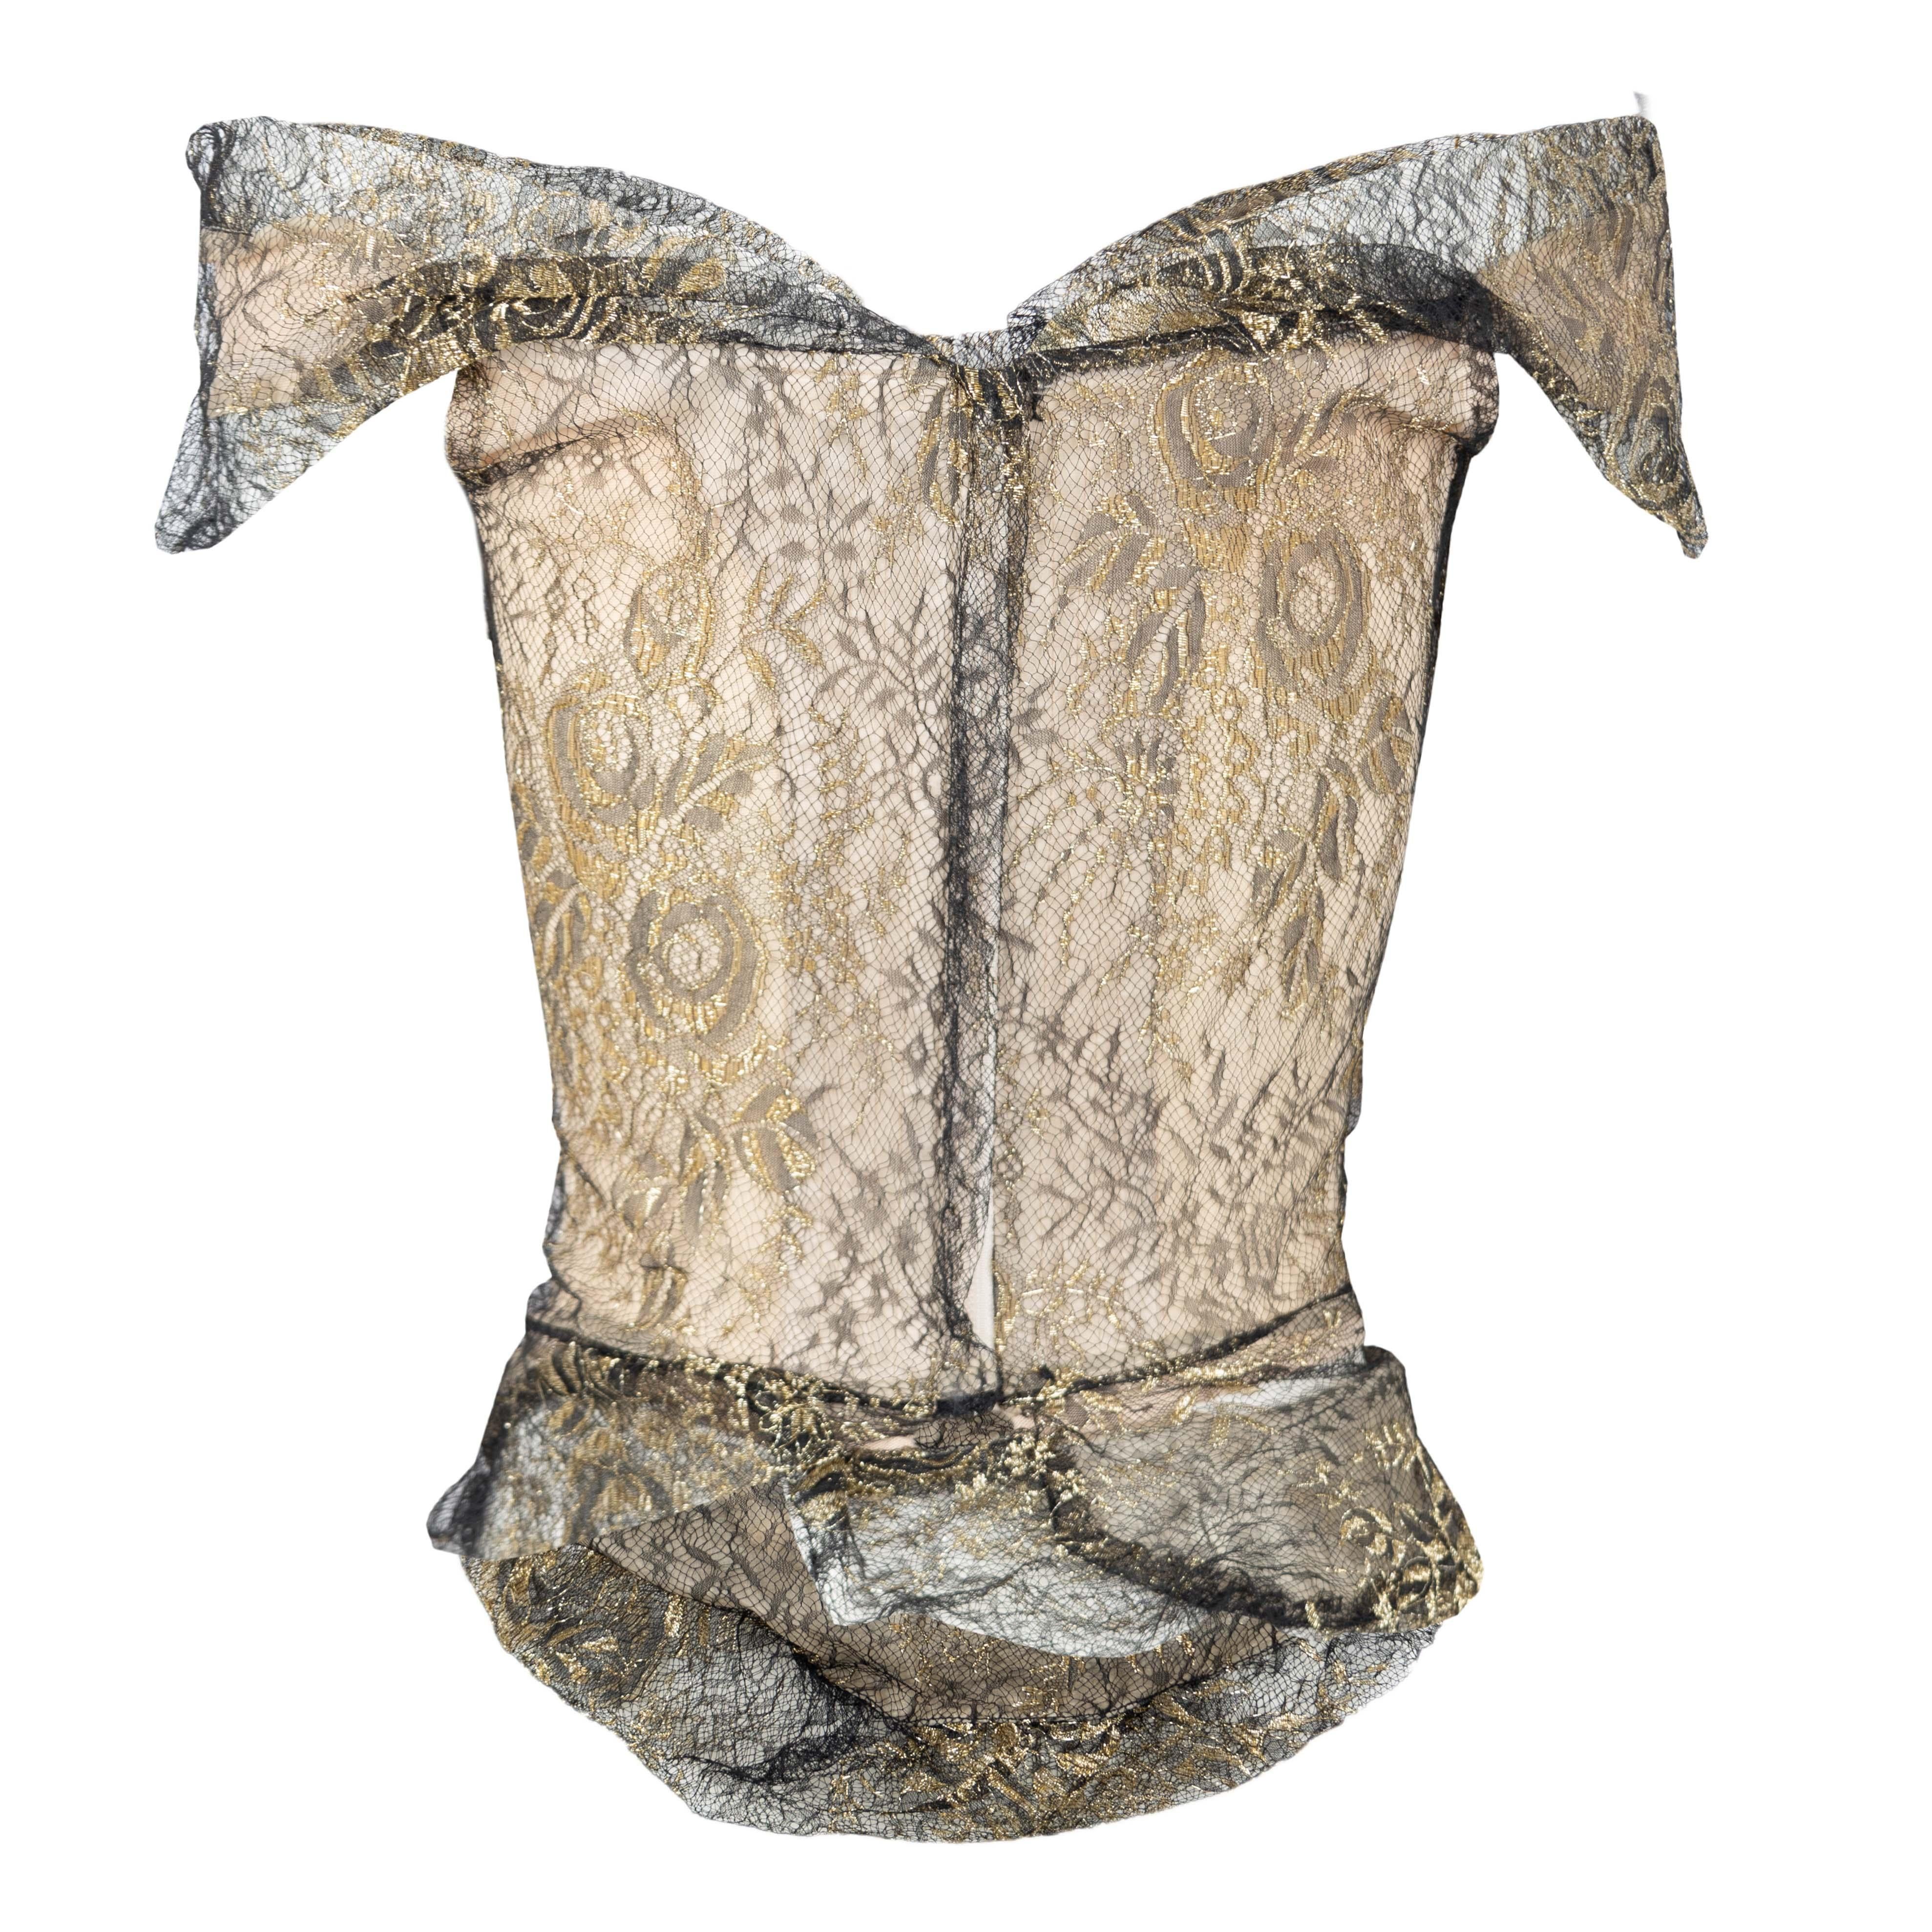 Vivienne Westwood Black and Golden Lace Corset - '00s In Excellent Condition For Sale In Milano, IT